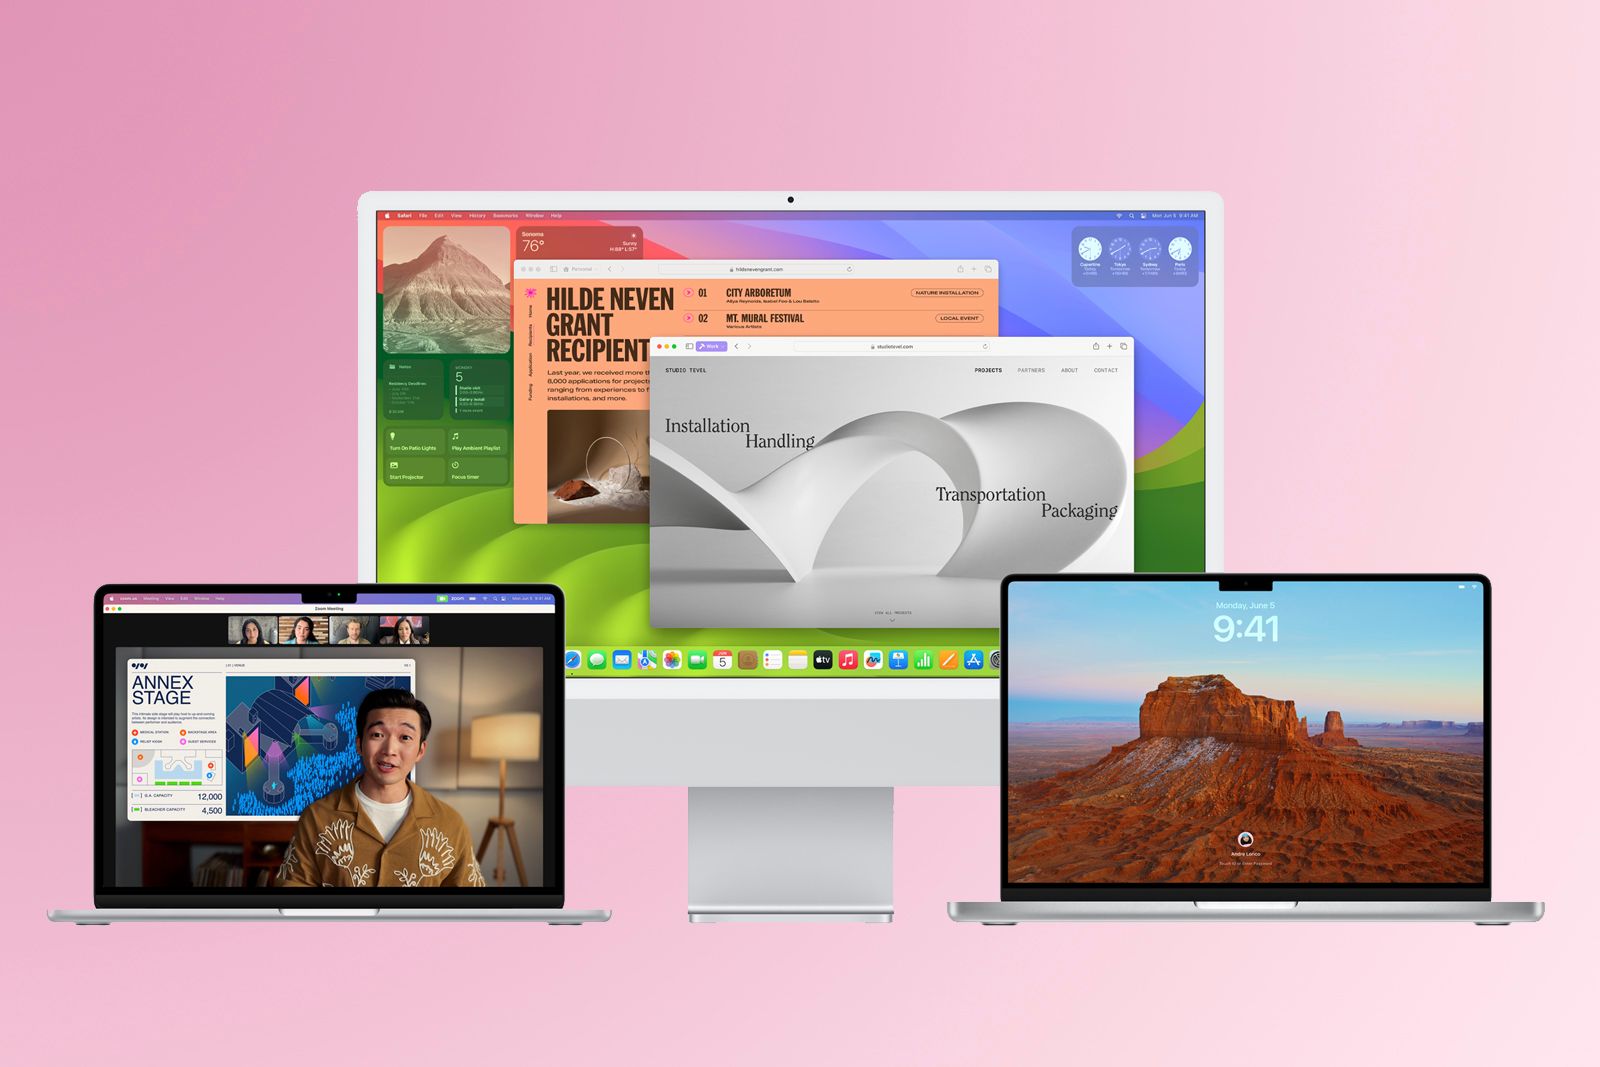 macos-14-sonoma-system-requirements:-will-your-mac-run-the-new-software?